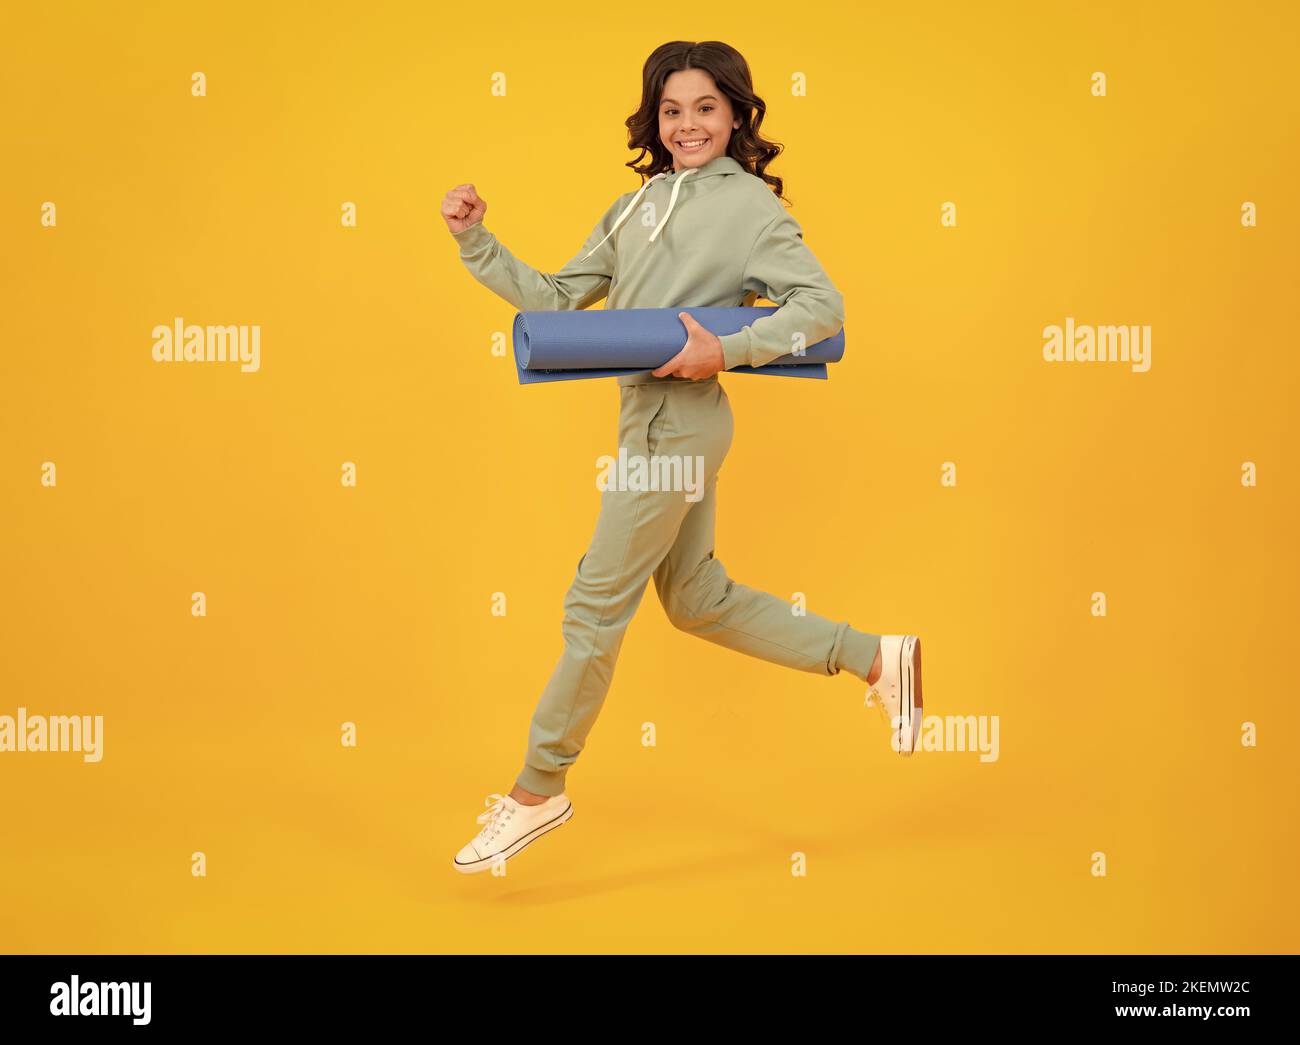 Sportswear advertising concept. Run and jump. Teenager child girl in tracksuits jogging suit posing in the studio hold fitness mat. Stock Photo